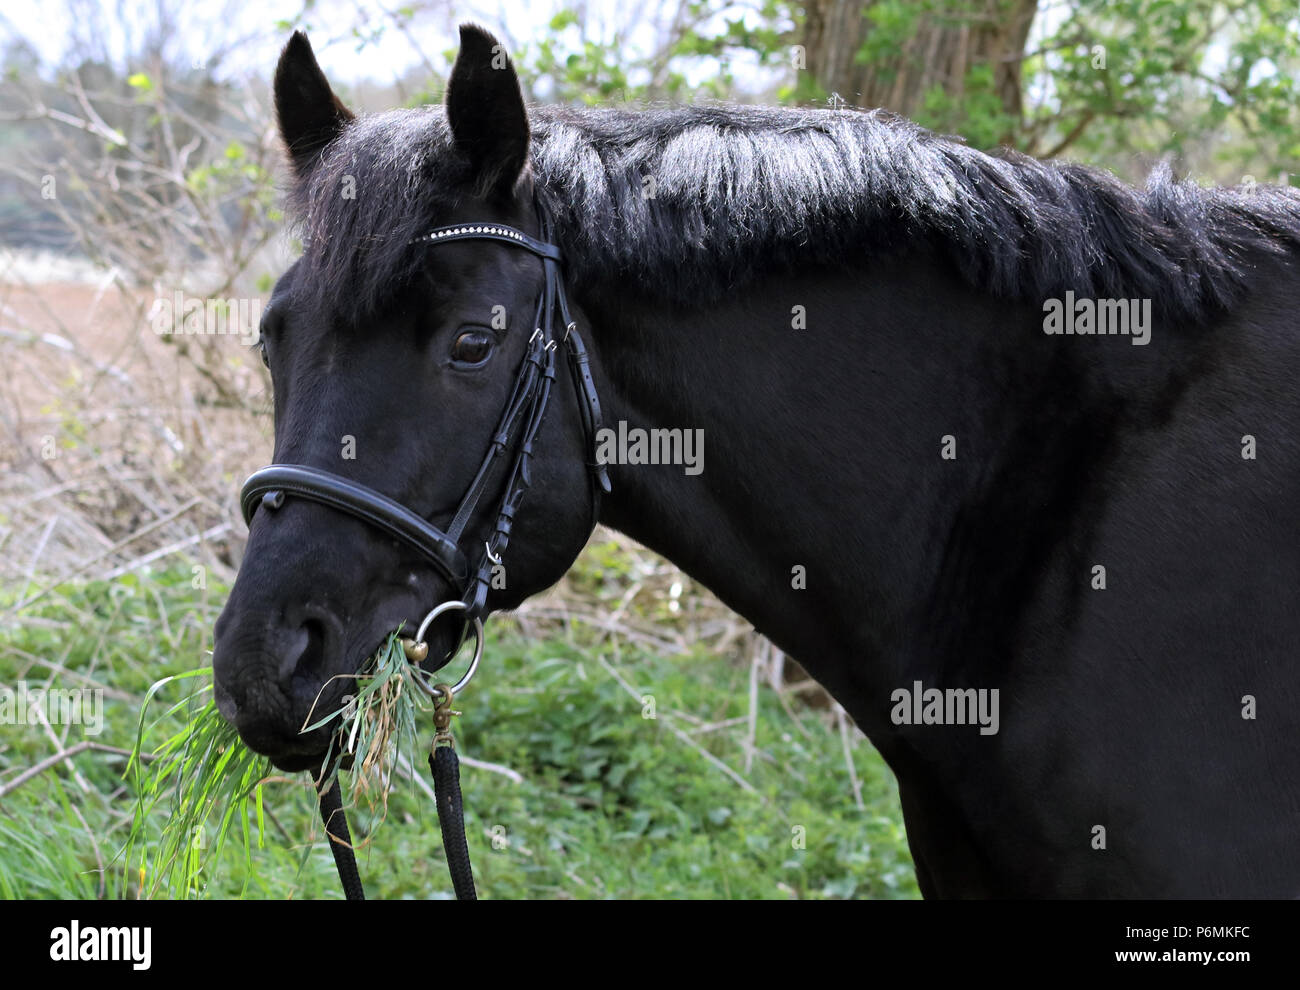 Melbeck, horse eats fresh grass from the roadside during a ride Stock Photo